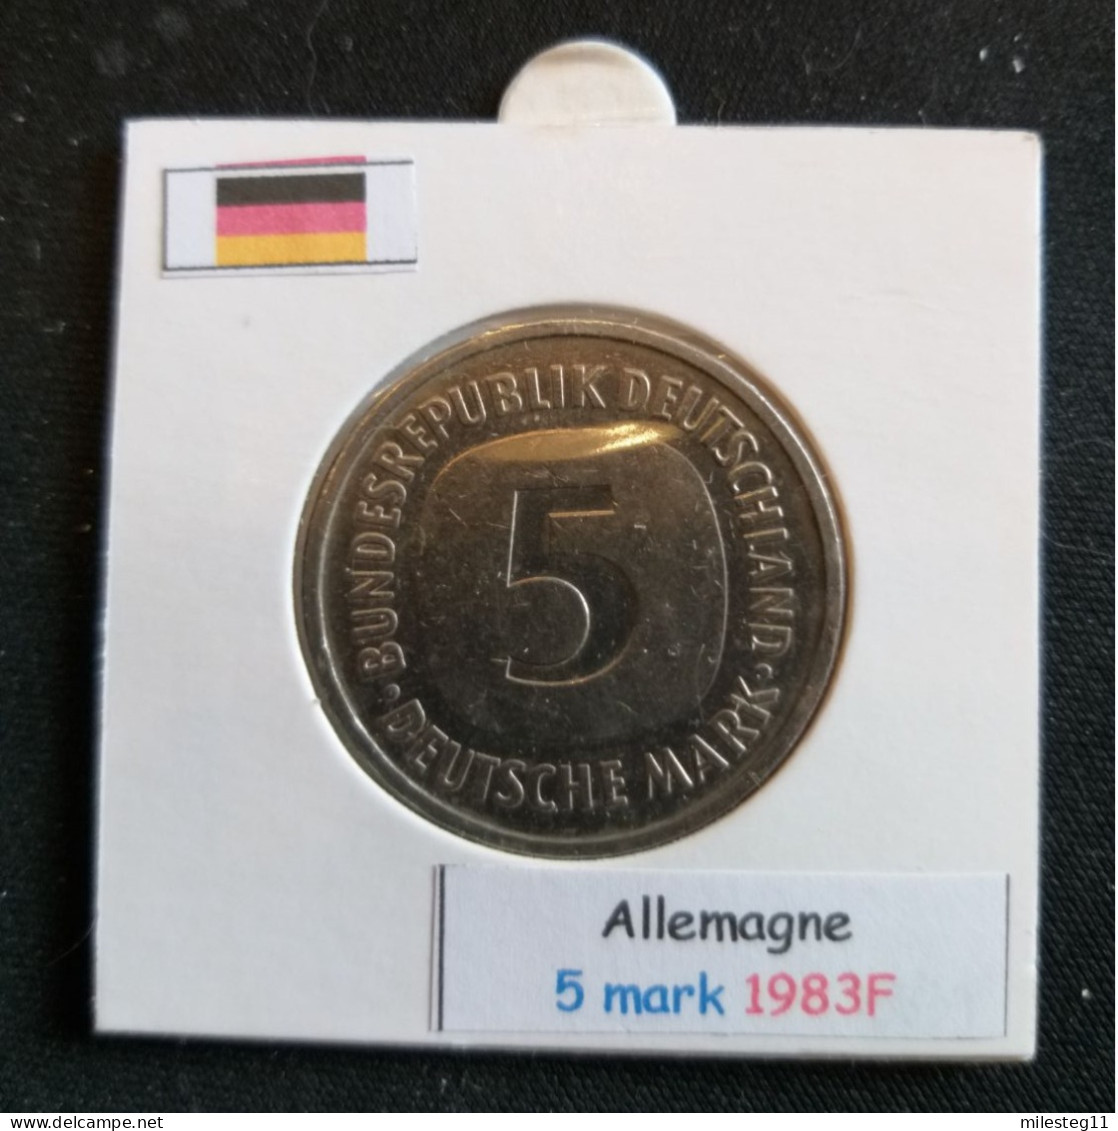 Allemagne 5 Mark 1983F Position A - 5 Marcos